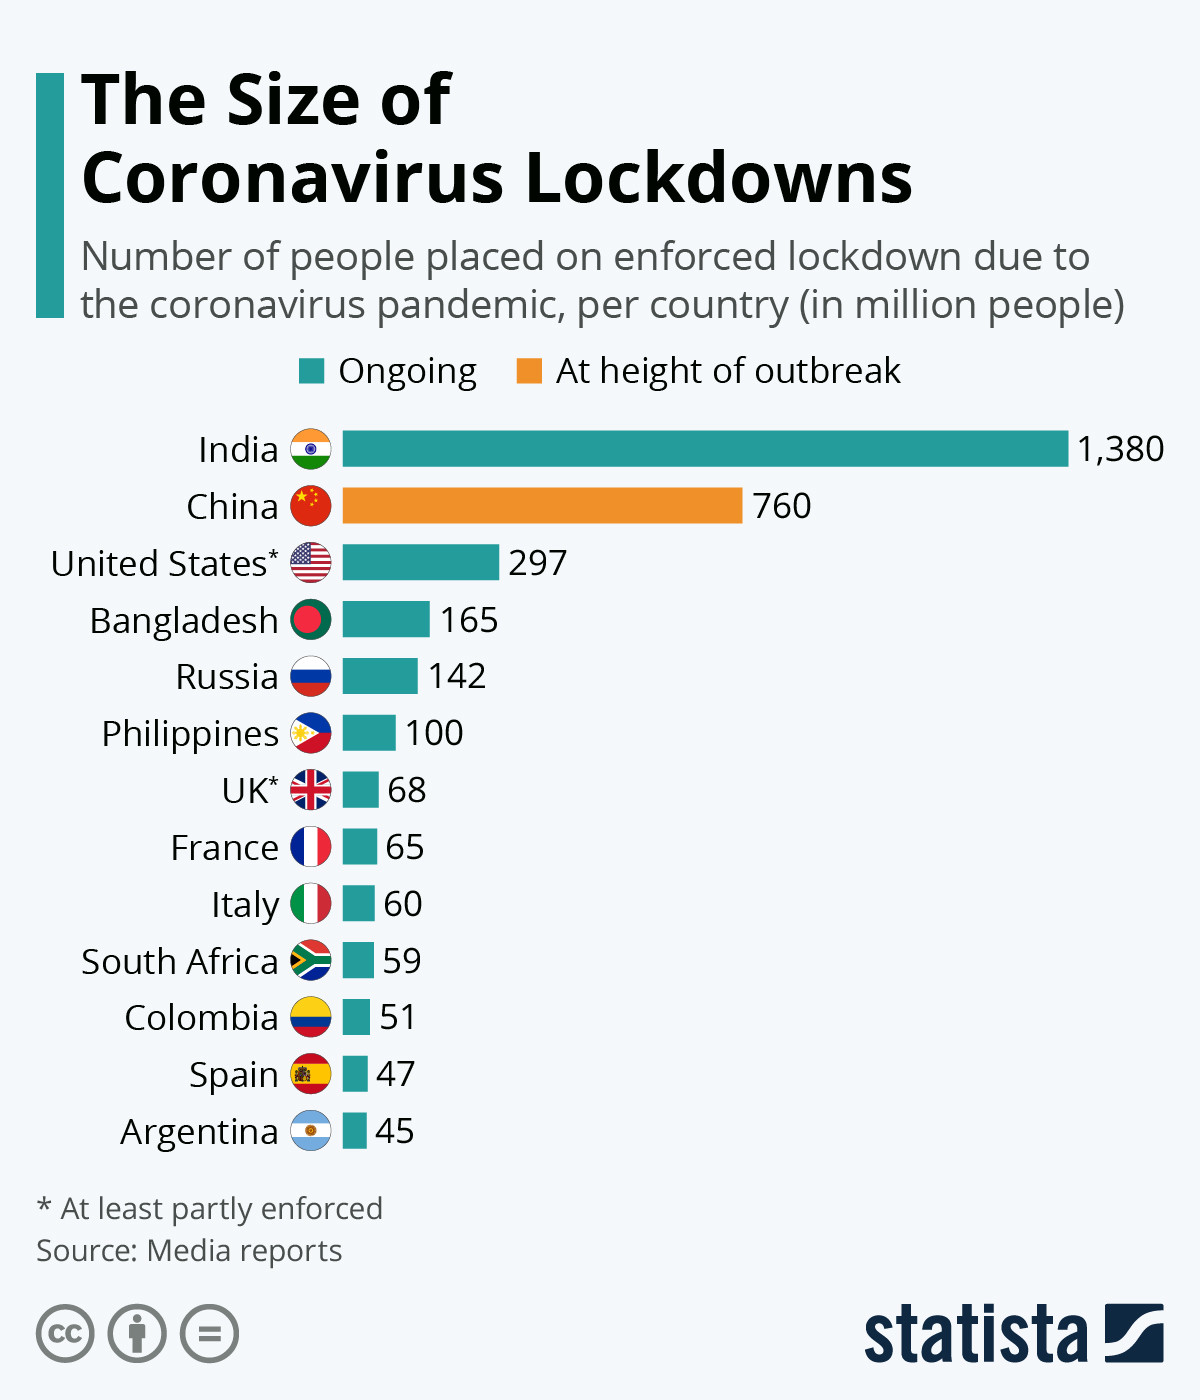 Estimated size of lockdowns around the world